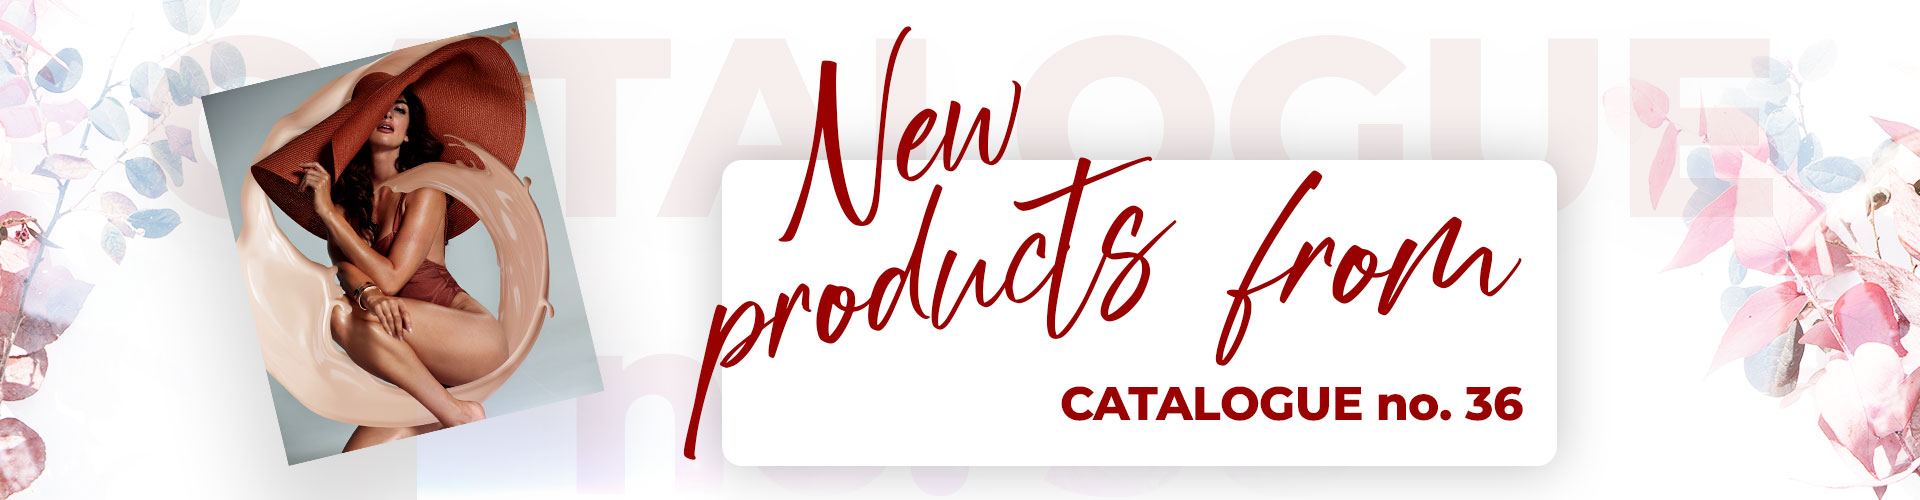 The premiere of the Product Catalogue No. 36